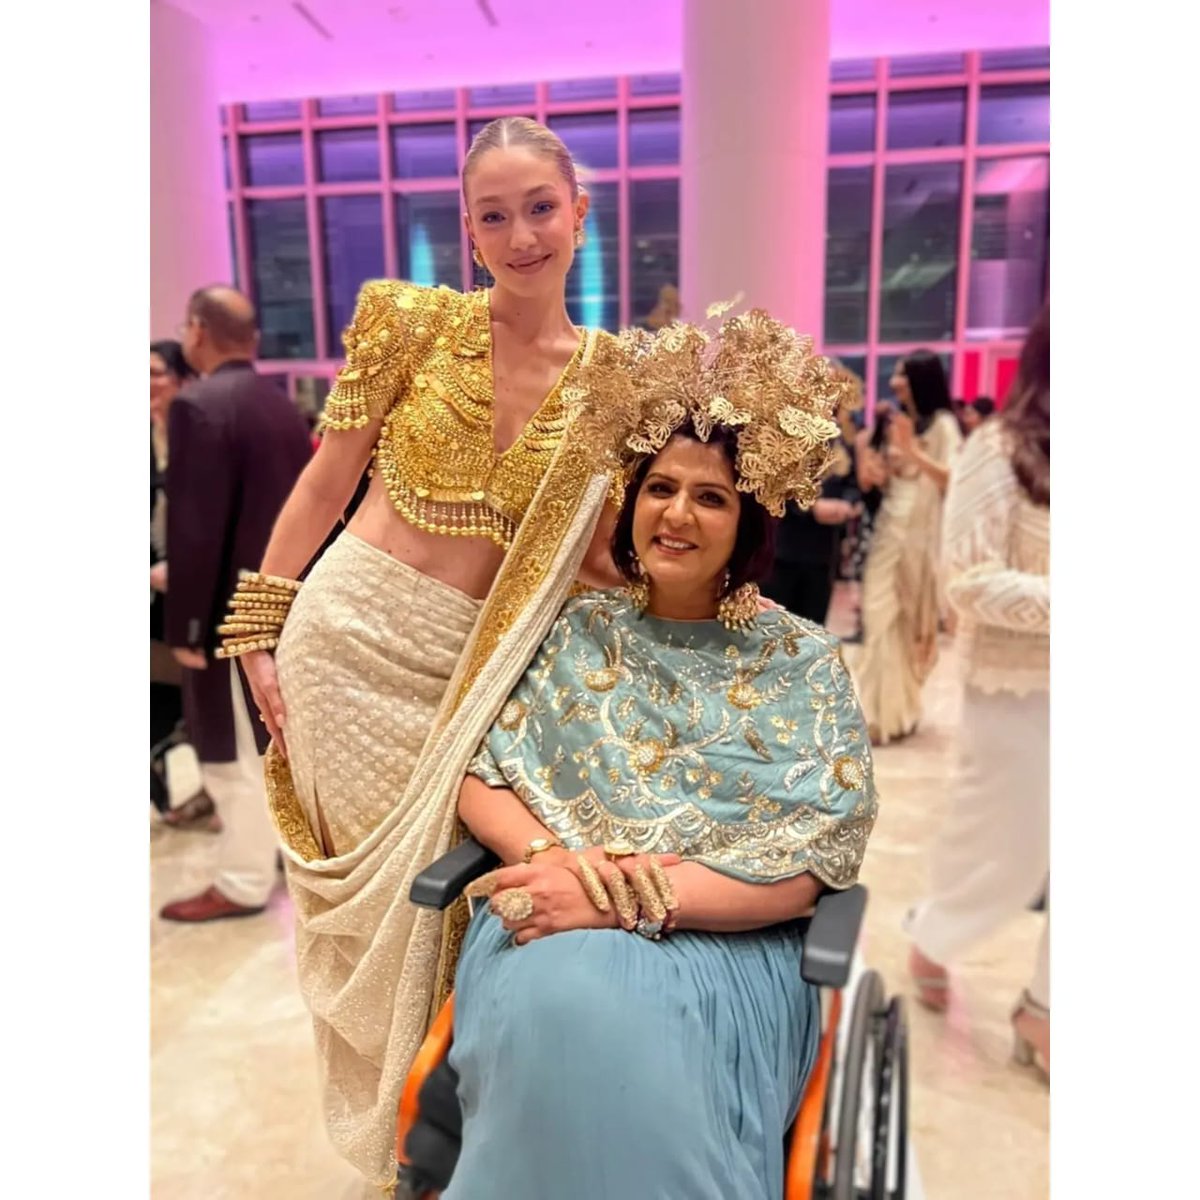 Happy to see #GigiHadid draped in traditional Indian Saree @nmacc_india #IndiaInFashion.
A #SportsmeetsFashion moment for me! My journey with @Paralympics gave me a platform to be an ambassador of #DisabilityInclusion! Be it #disabilitysport or #disabilityfashion, we do it all!✨